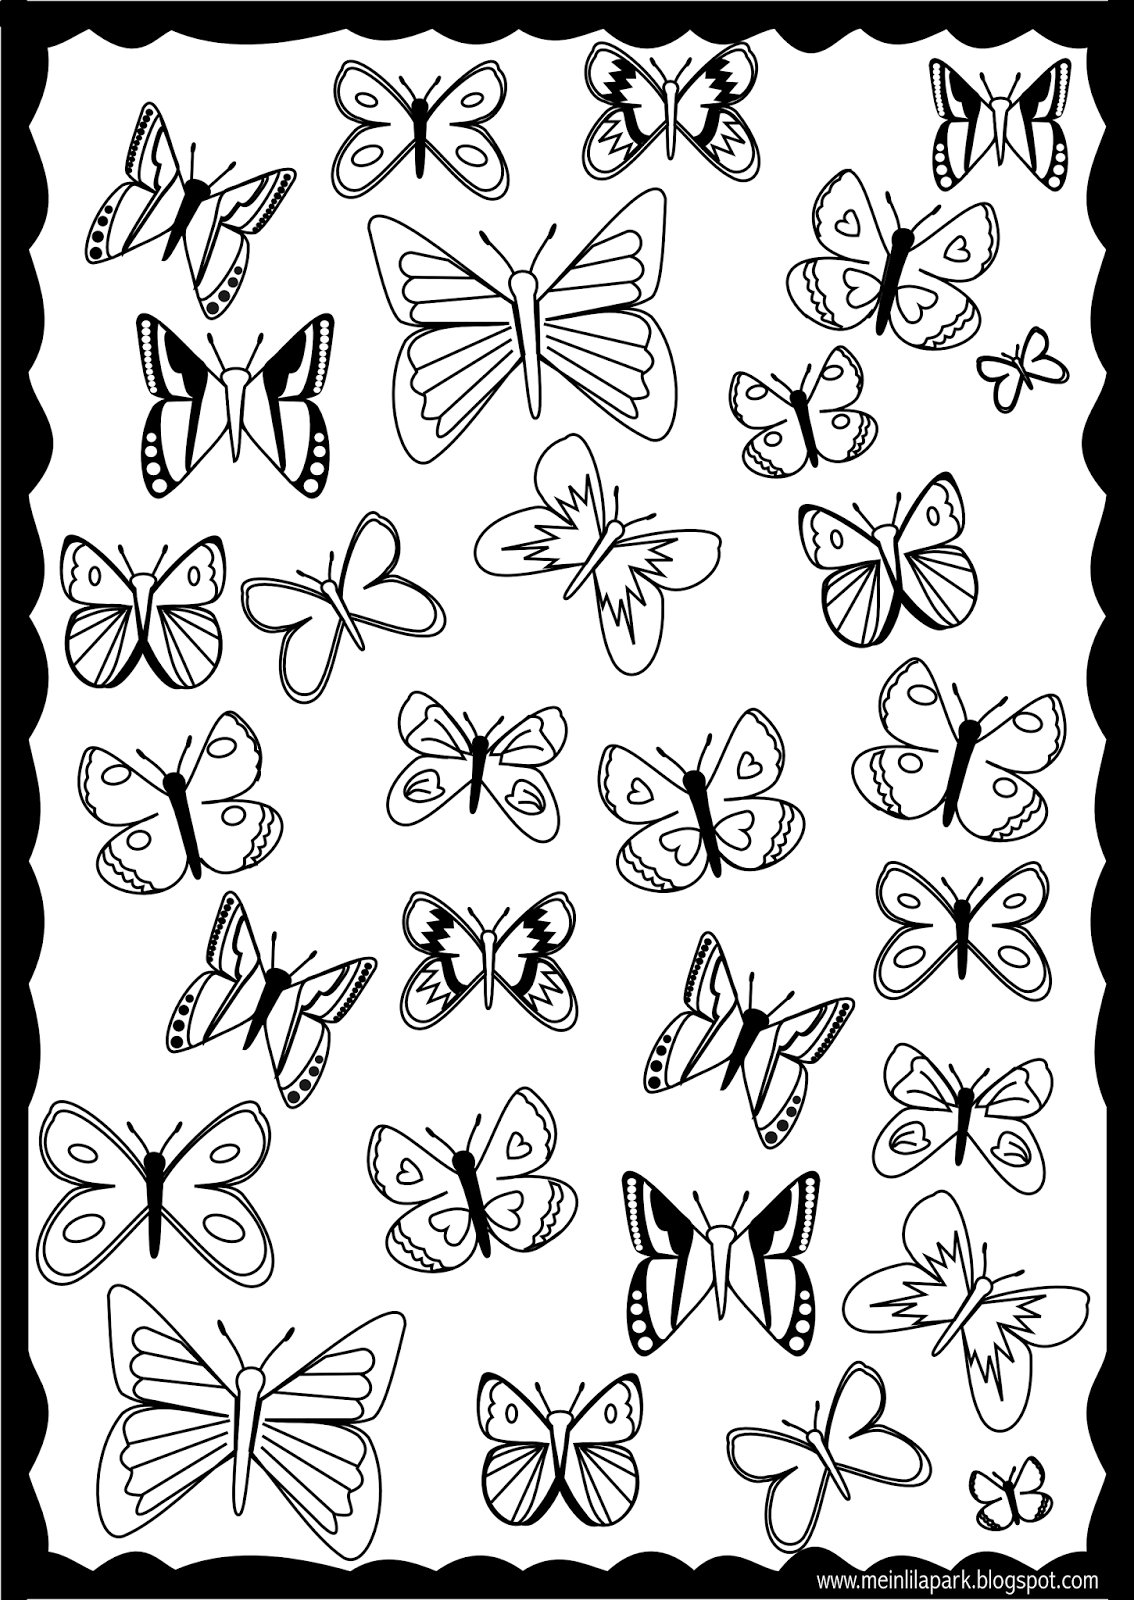 Free Printable Butterflies Pictures